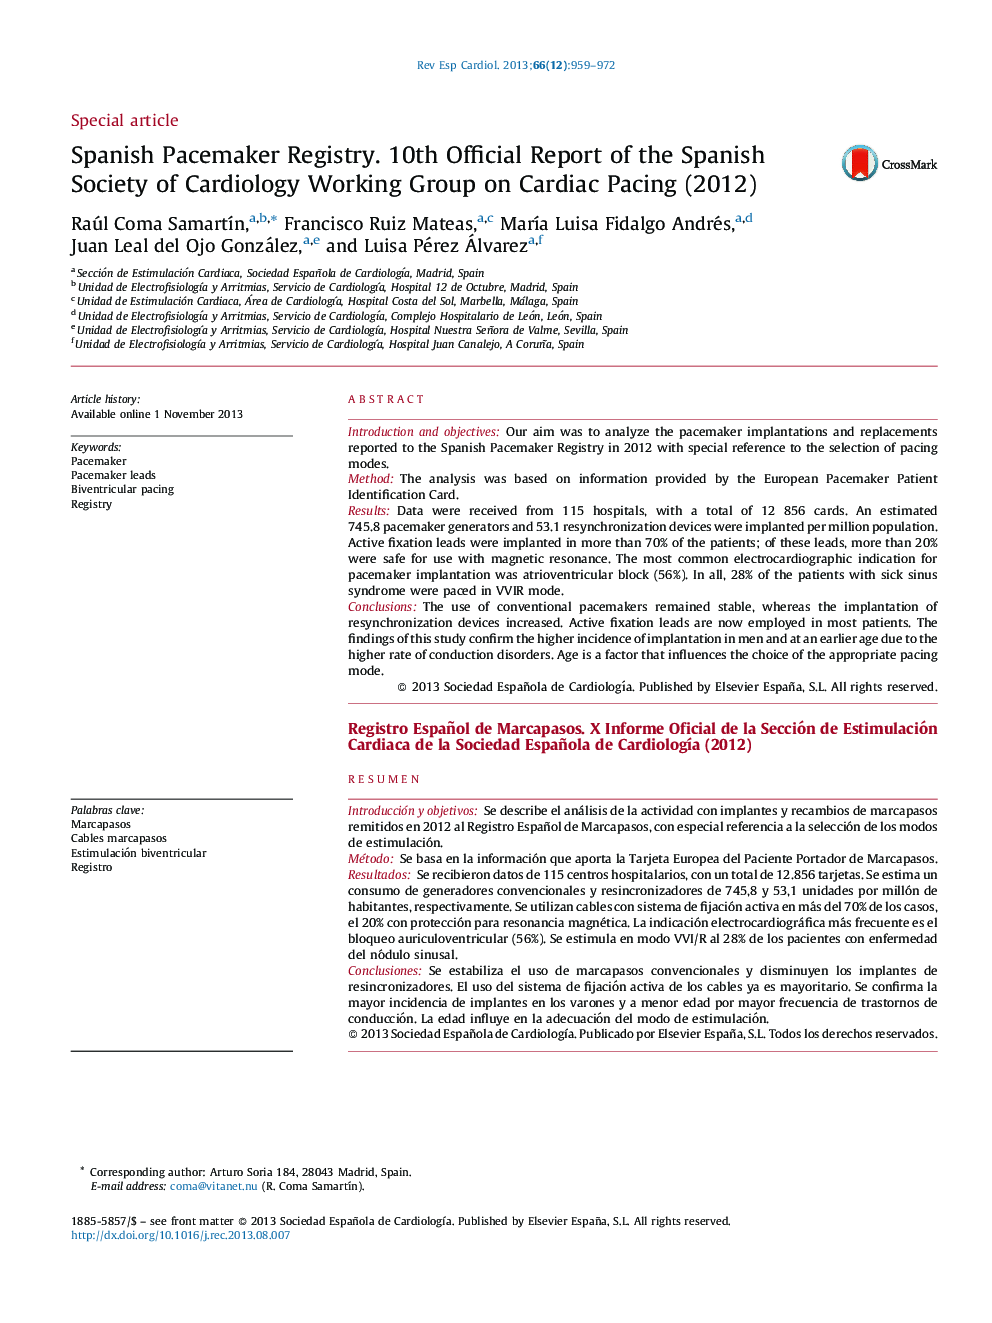 Spanish Pacemaker Registry. 10th Official Report of the Spanish Society of Cardiology Working Group on Cardiac Pacing (2012)